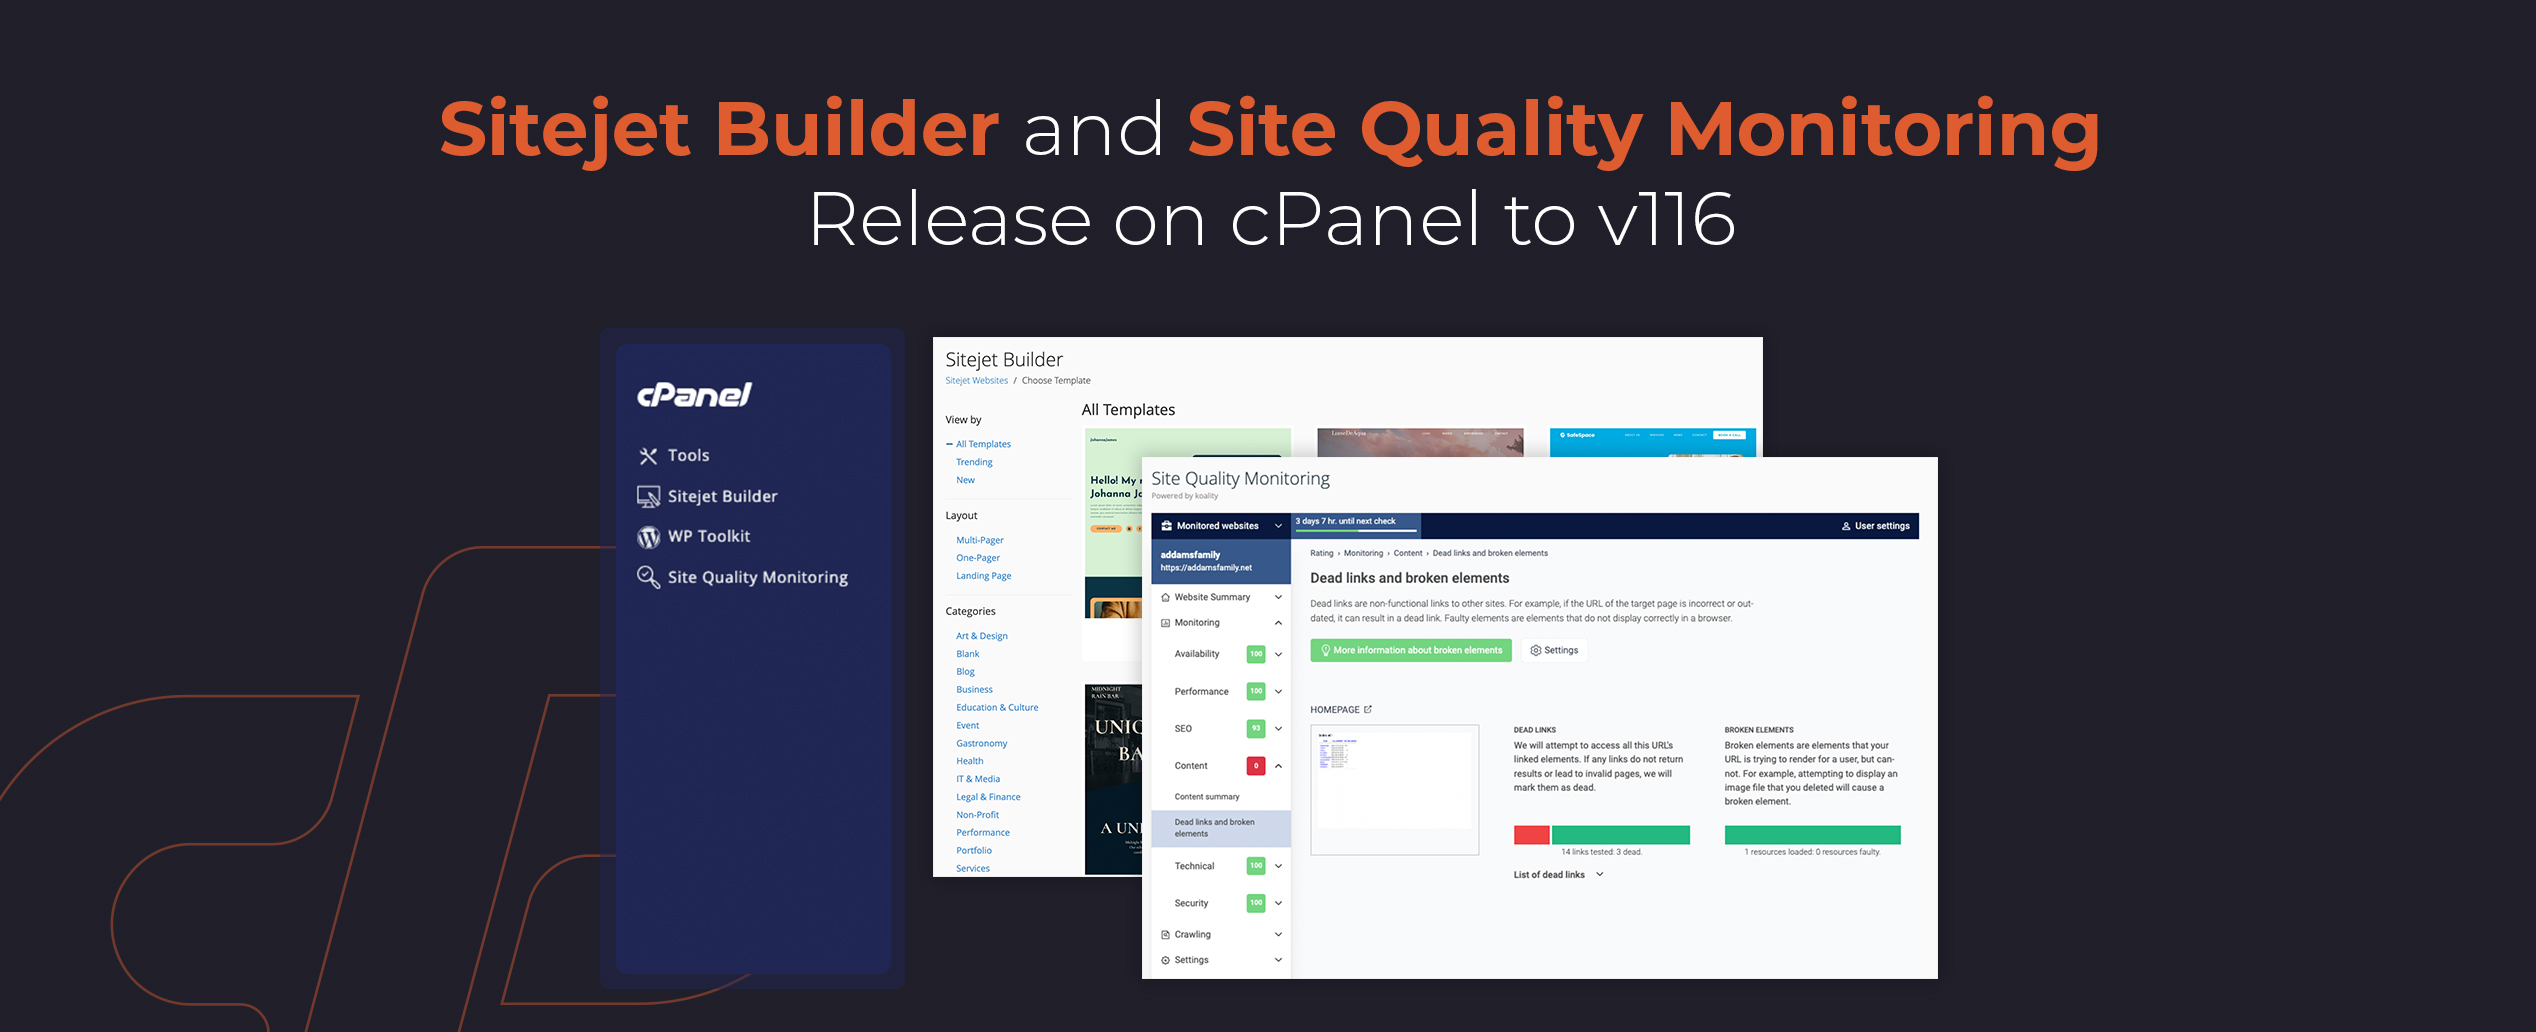 Sitejet Builder and Site Quality Monitoring in v116 and Beyond